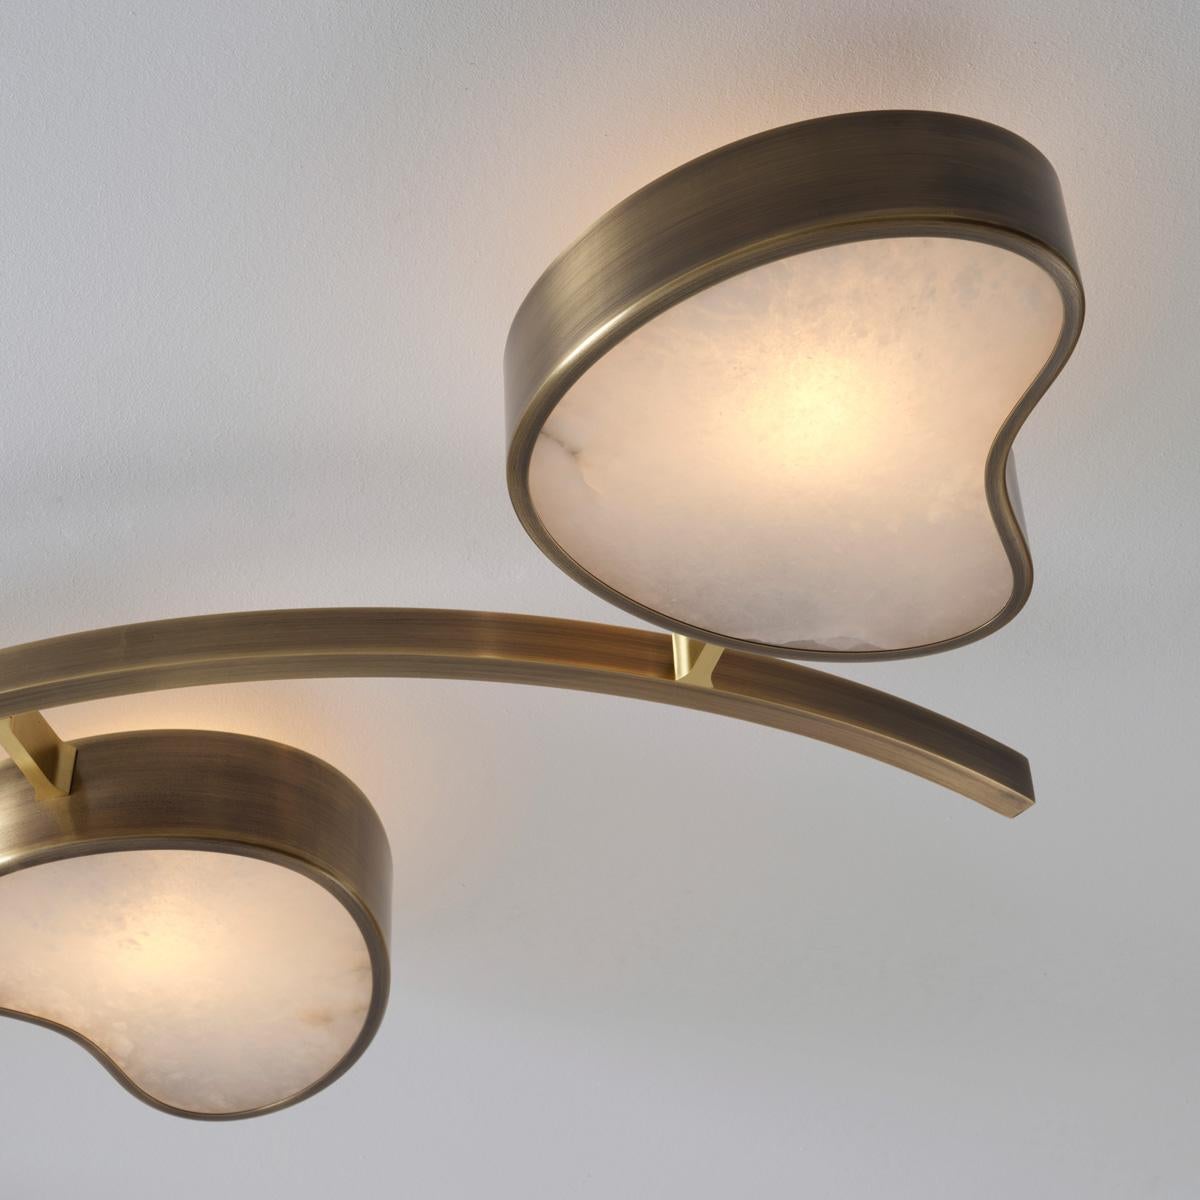 Contemporary Cuore N.6 Ceiling Light by Gaspare Asaro. Peltro and Bronze Finish For Sale